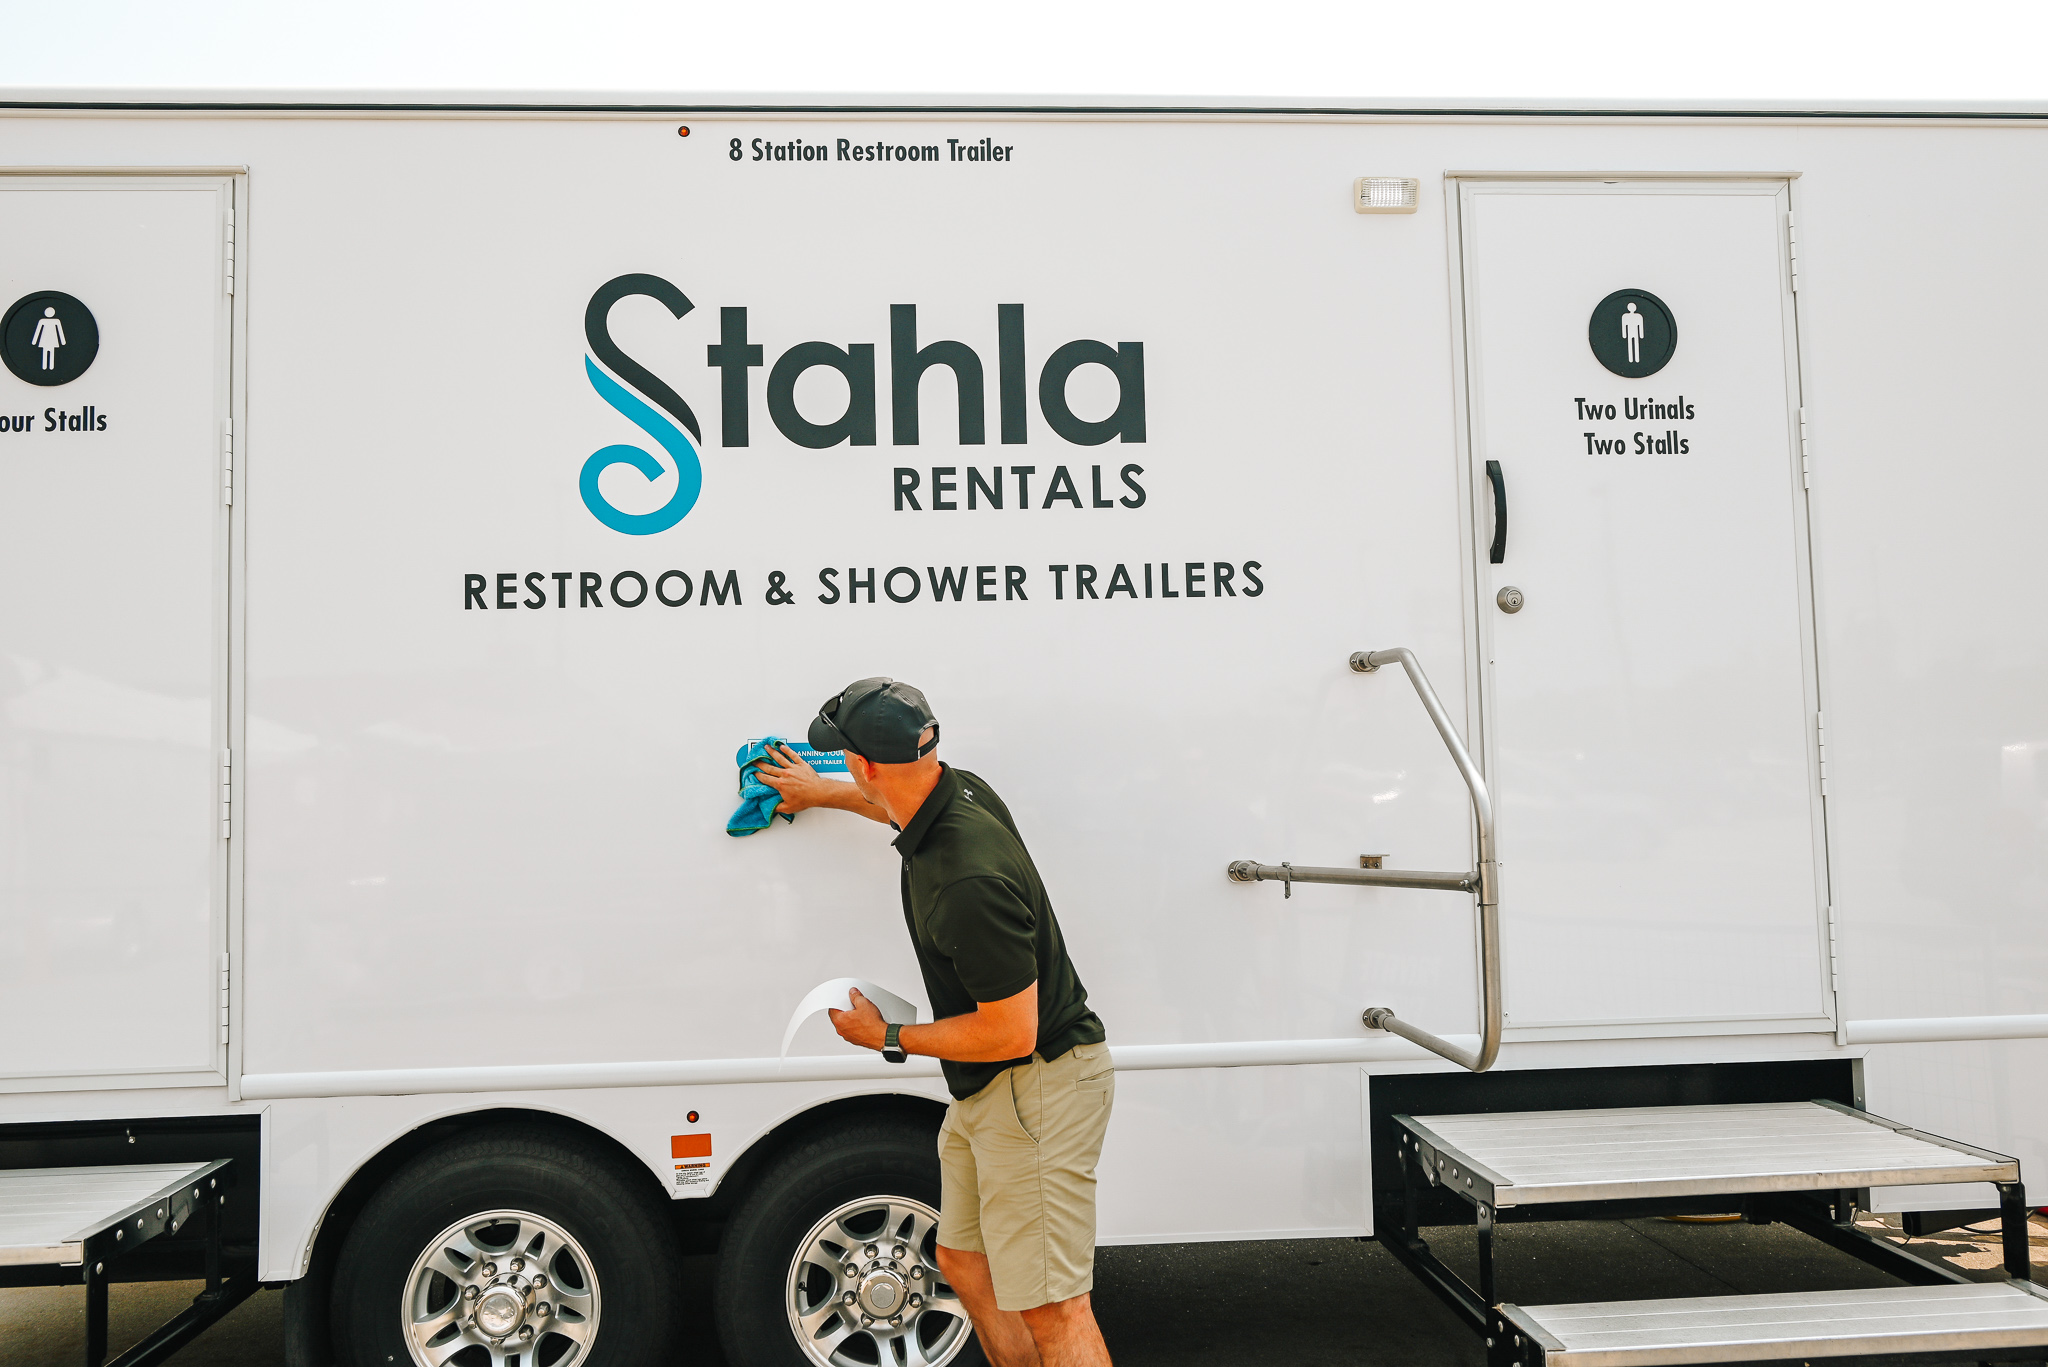 Shower and Restroom Trailer Rentals 1687813556 DSC 3155 - What to Do if Portable Toilet Waste Spills: Essential Steps